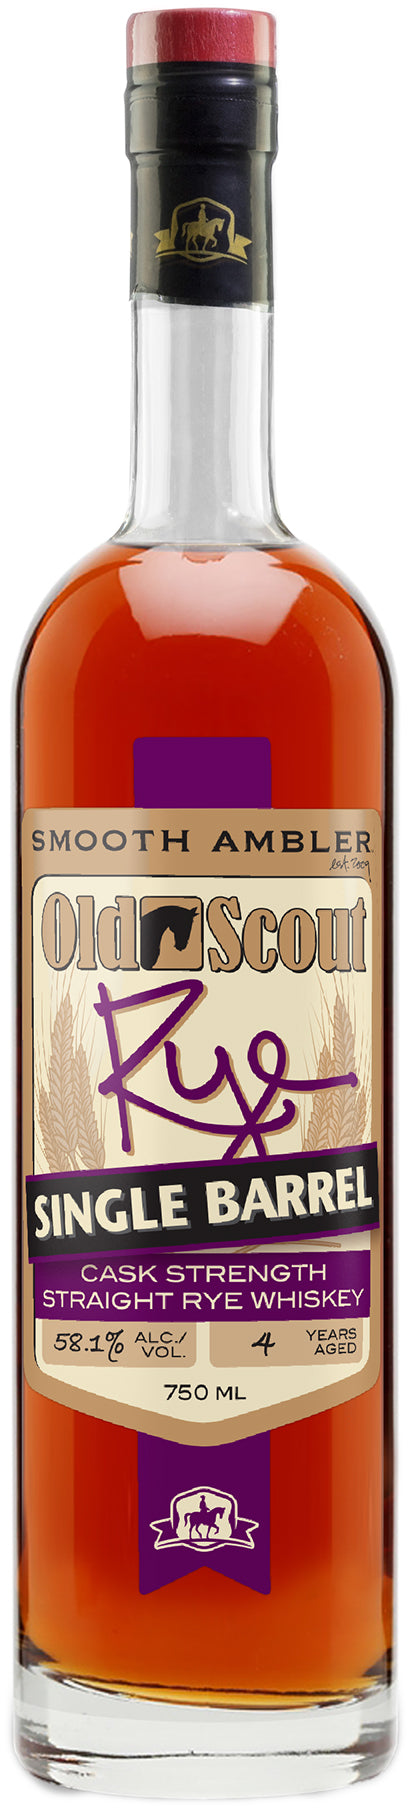 Smooth Ambler Old Scout Cask Strength Straight Rye 116.4 Proof Whiskey